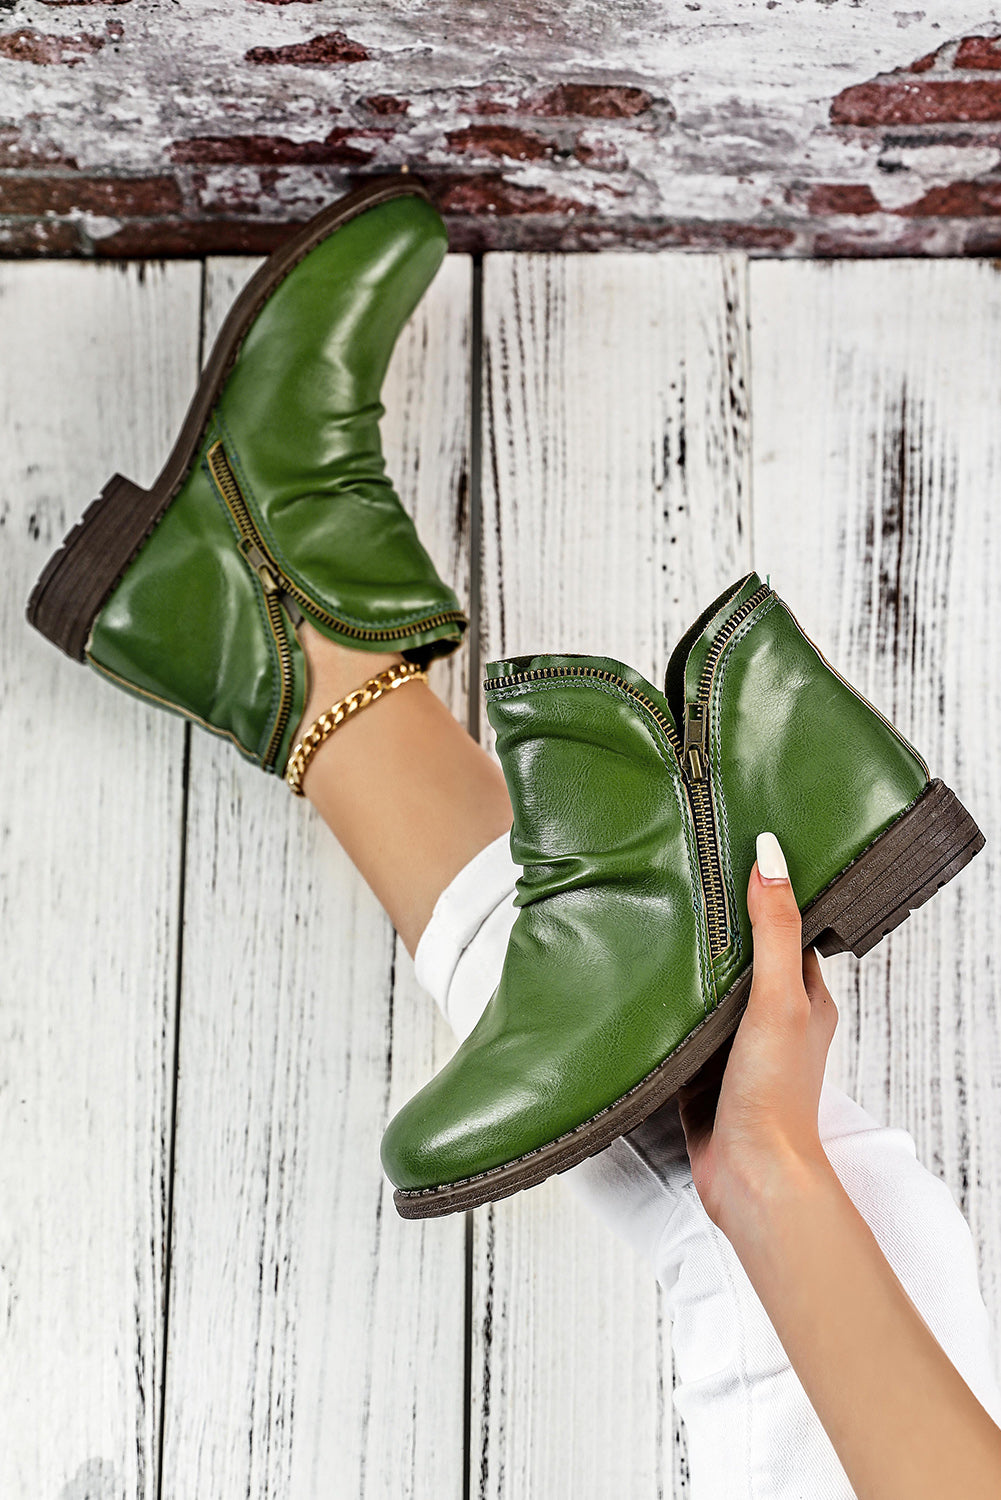 BH02143-9-37, BH02143-9-38, BH02143-9-39, BH02143-9-40, BH02143-9-41, BH02143-9-42, Green  Women Boots PU Leather Ankle Boots Waterproof Short Boots